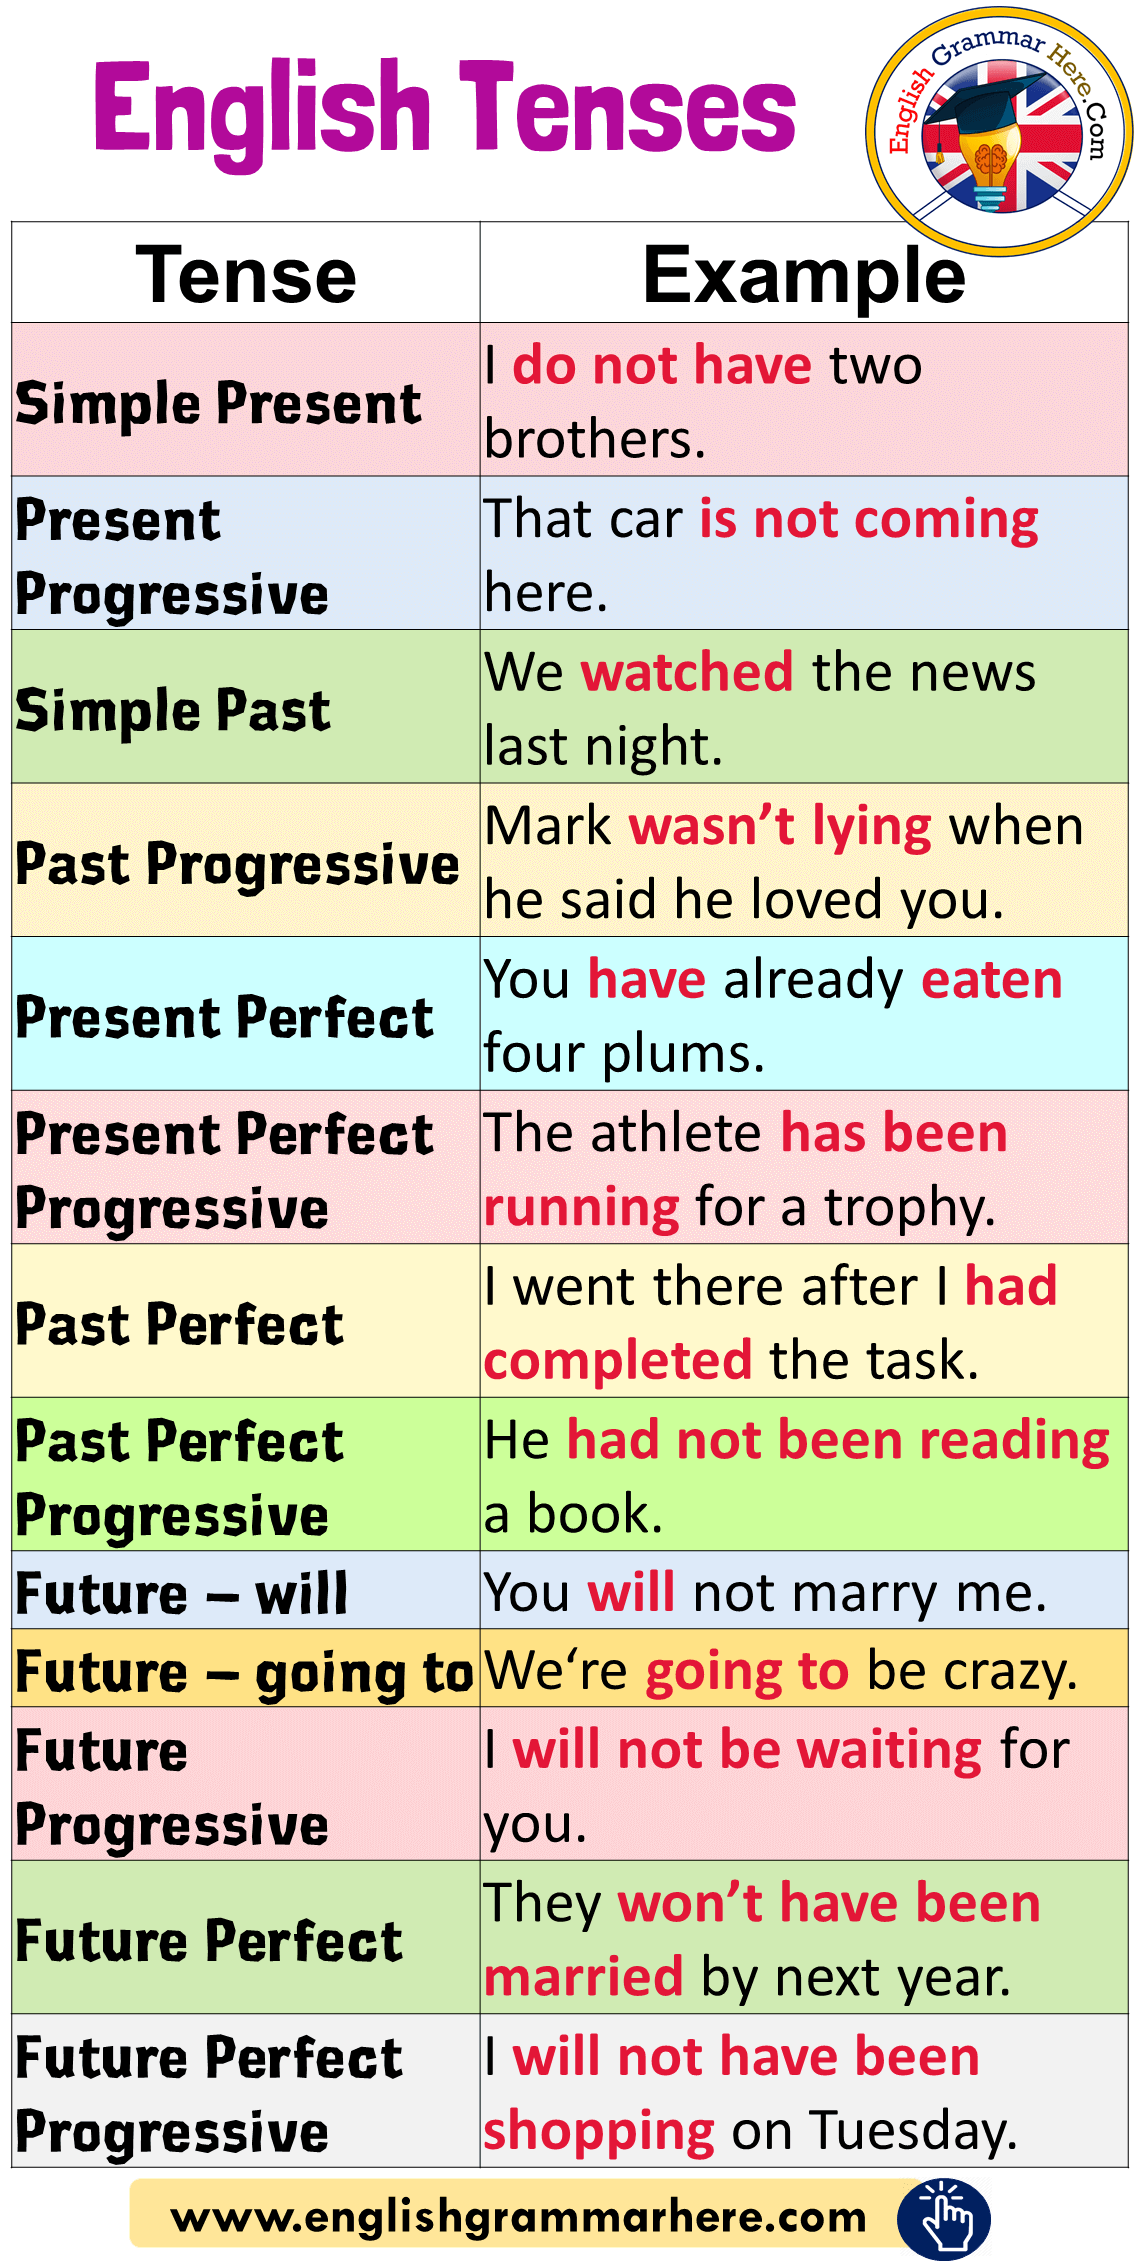 English Tenses and Example Sentences